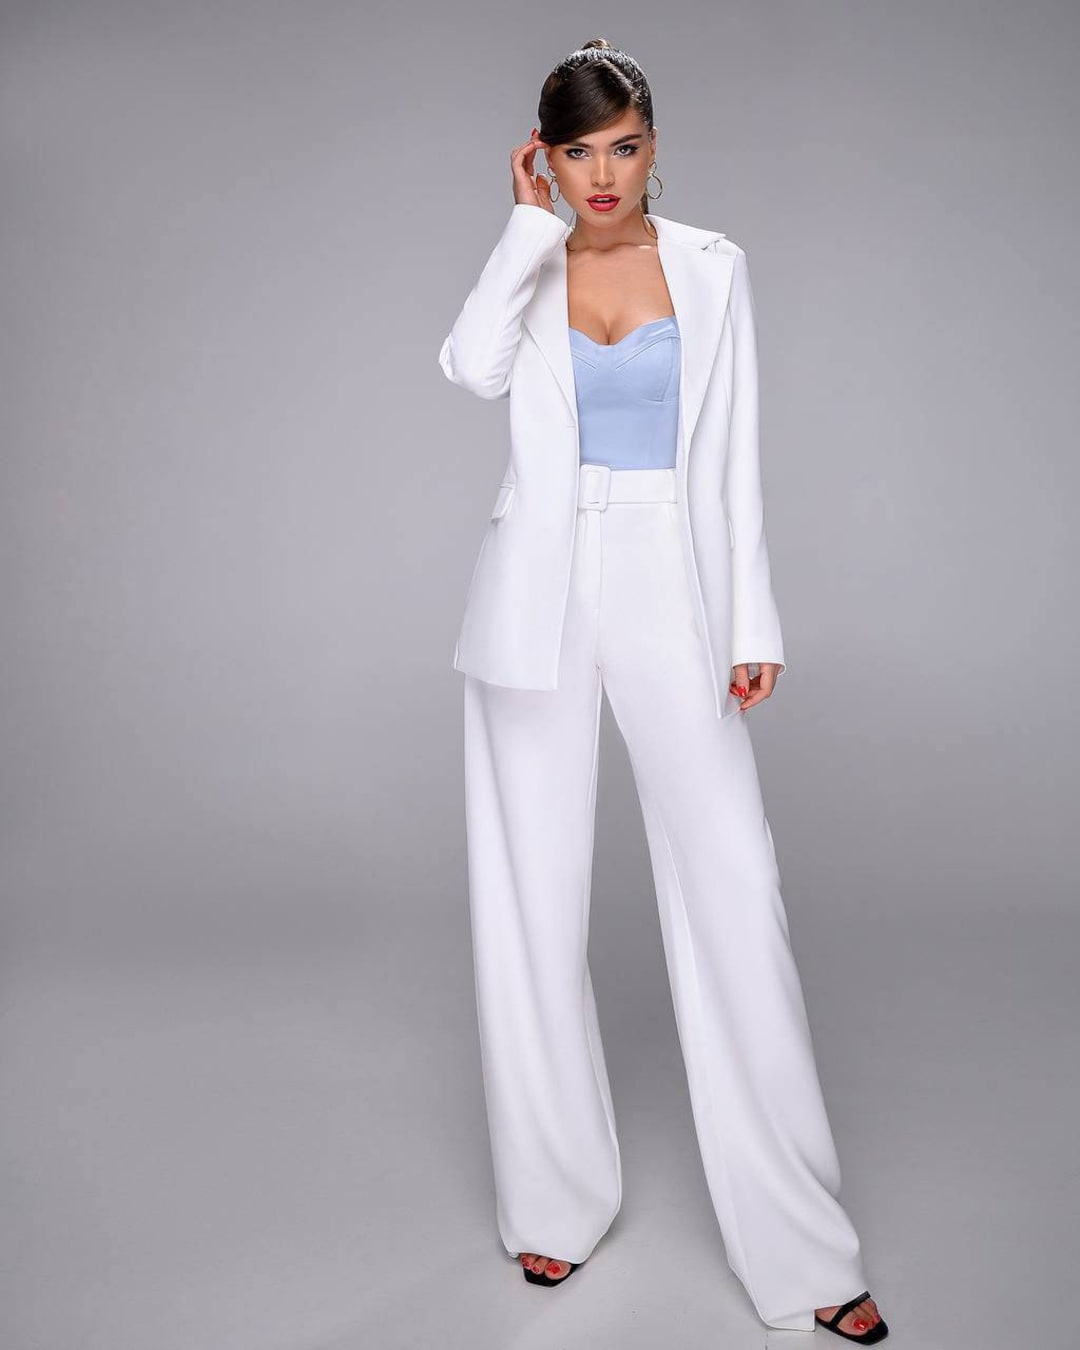 White Pantsuit for Women White Wide Leg Pants Suit Set With - Etsy